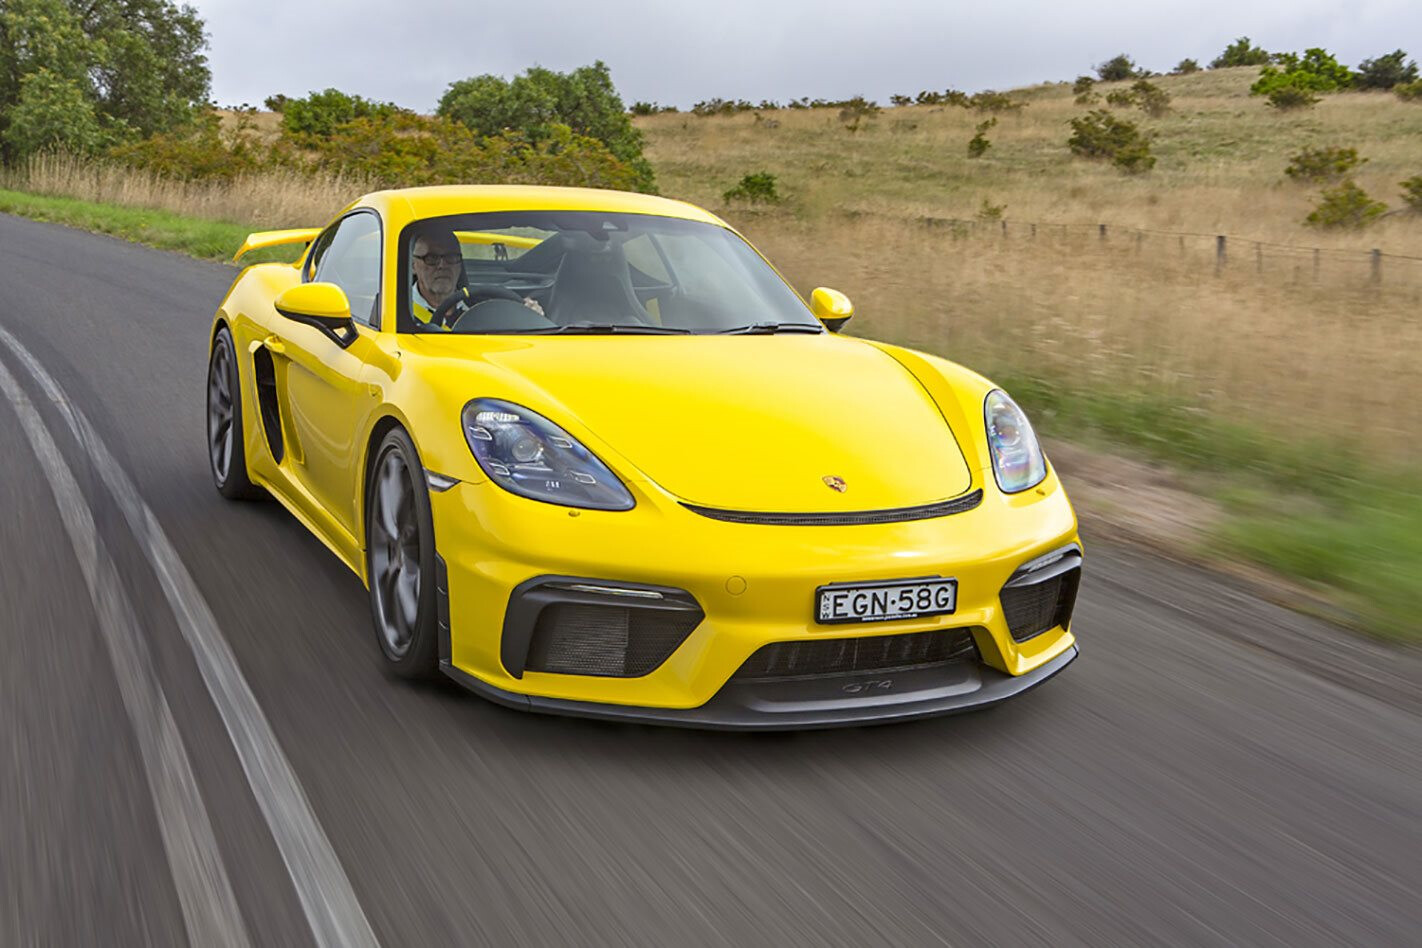 21 Porsche 718 Cayman Gt4 And Spyder Gain New Pdk Option With Gts 4 0 Variants